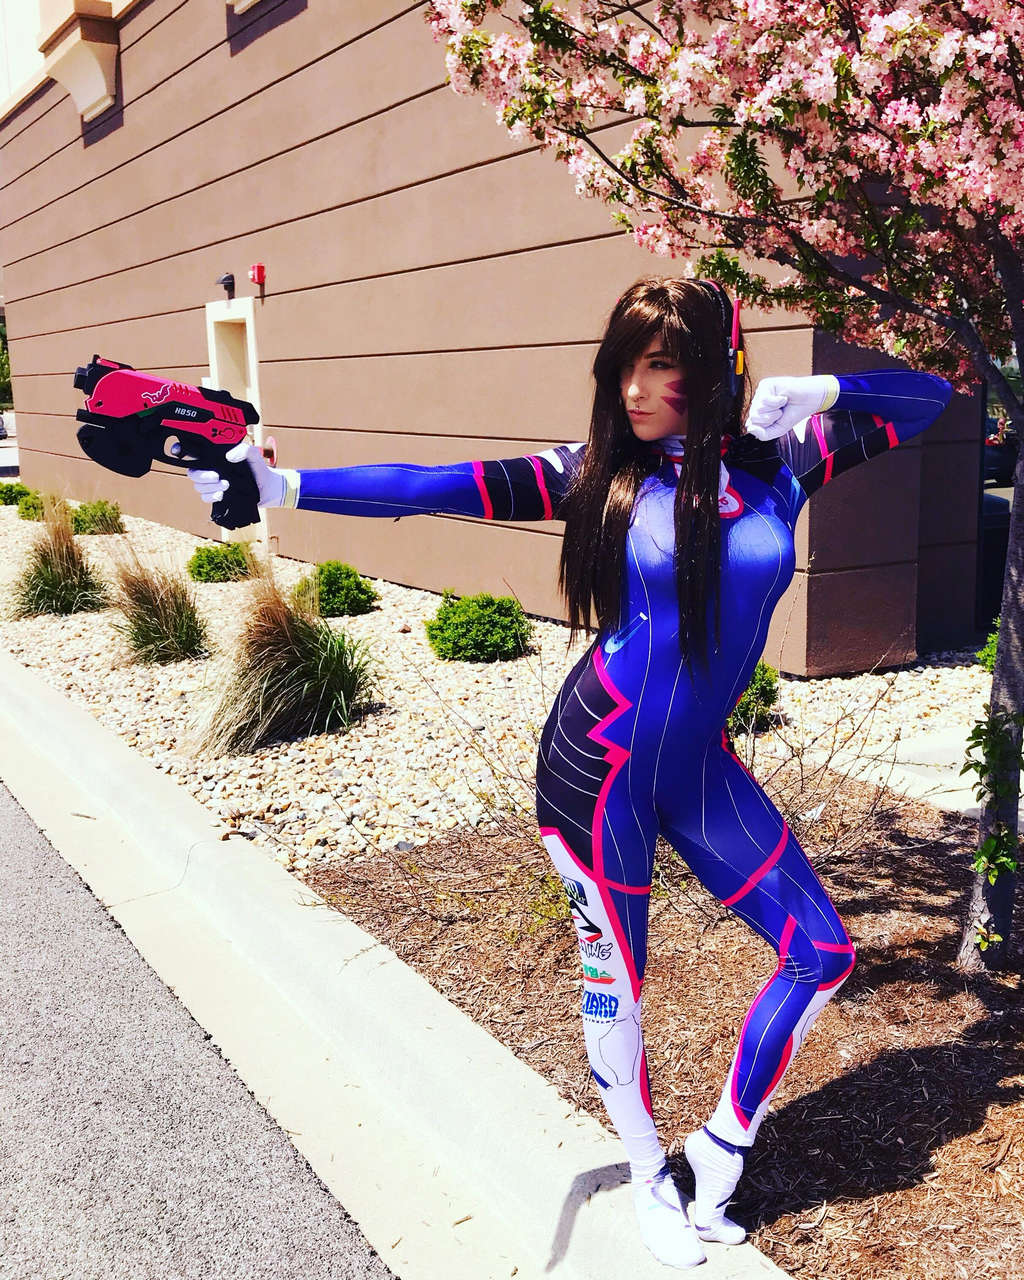 D Va By Chickfox Posting More Pictures As I Go Through The